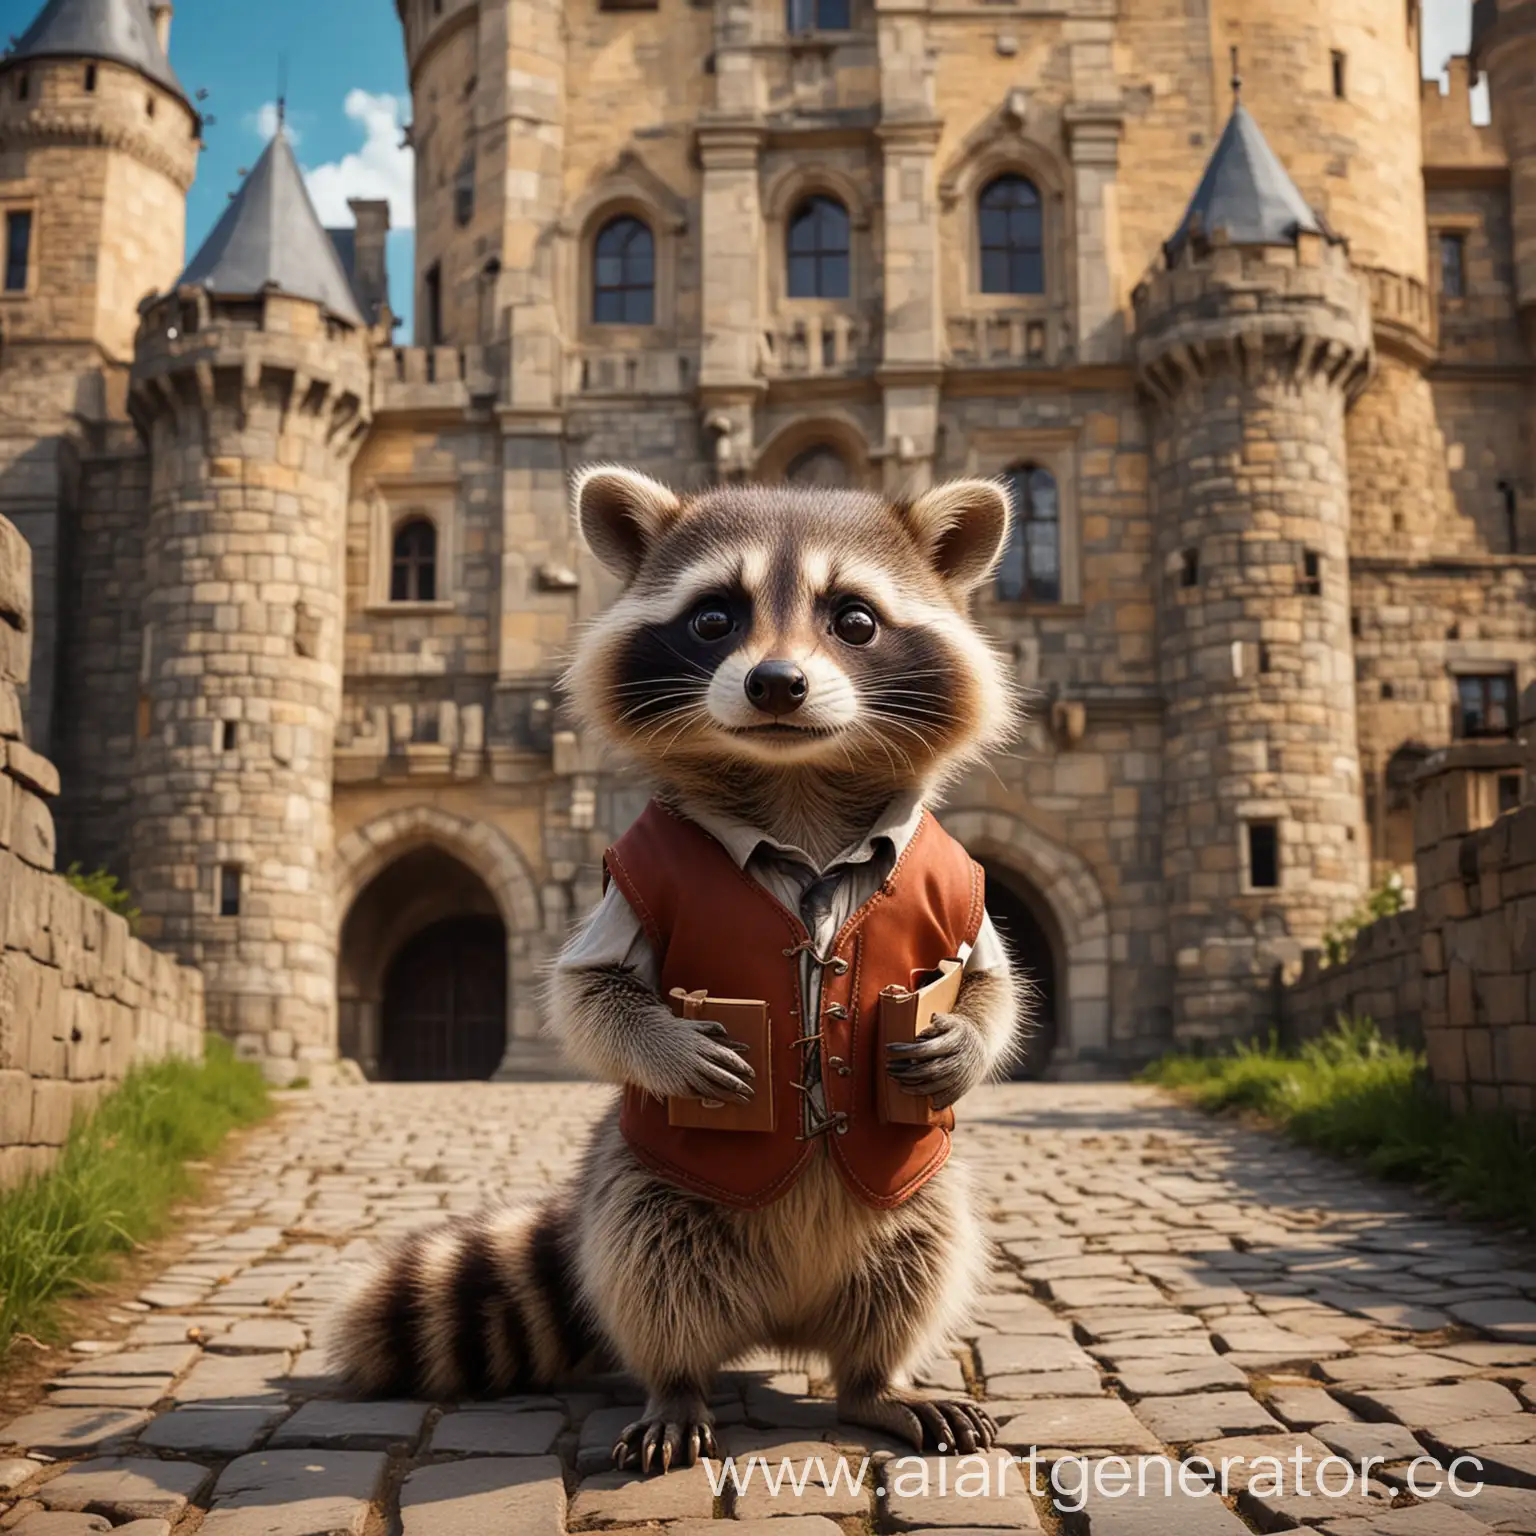 Cute-RaccoonStudent-at-Elite-Castle-in-HistoricalPhilological-Style